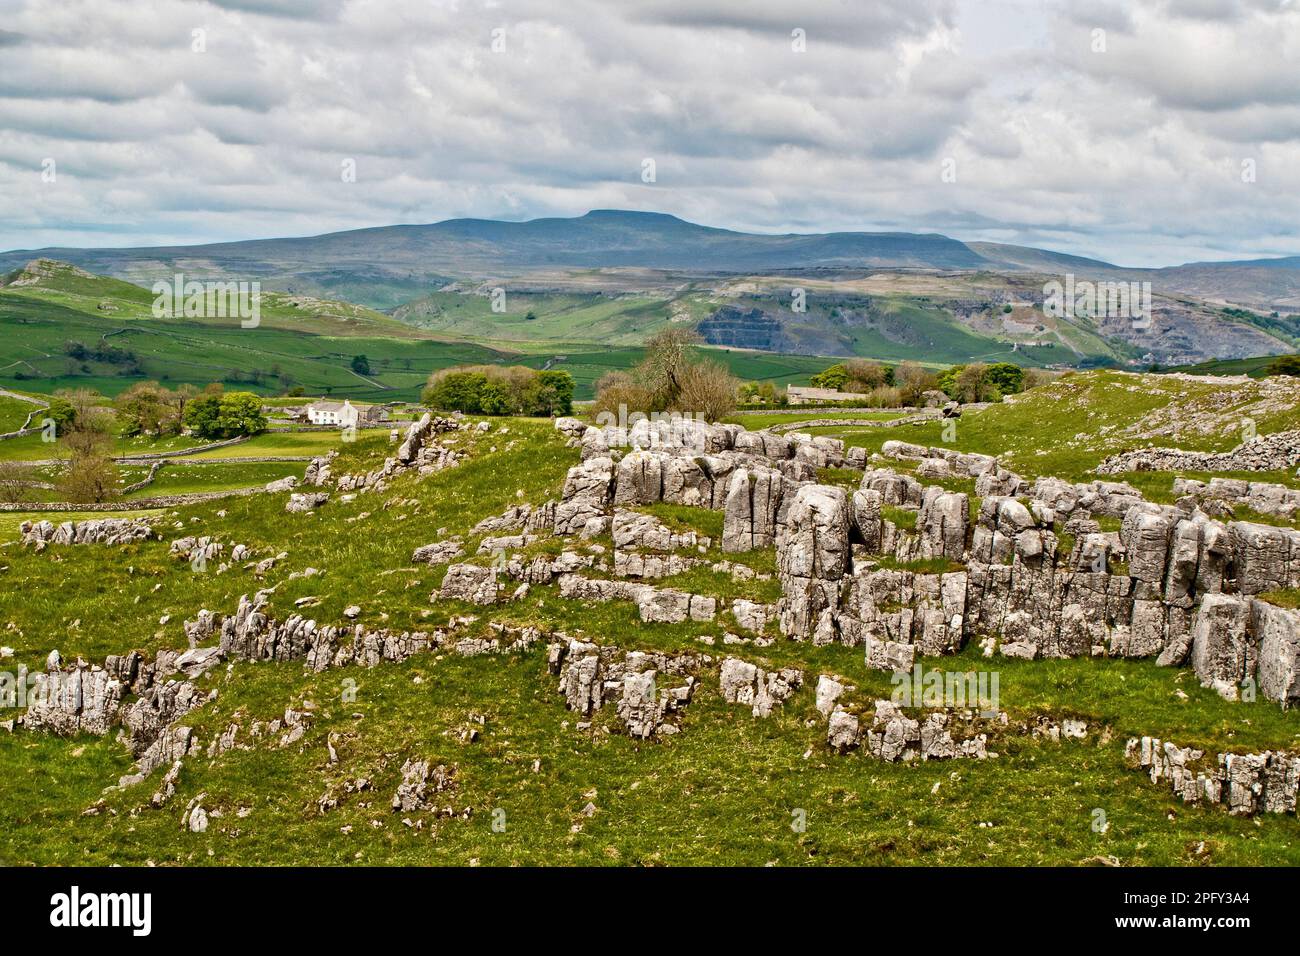 The long rise to Ingleborough can be seen clearly from Winskill in beautiful limestone scenery. Stock Photo